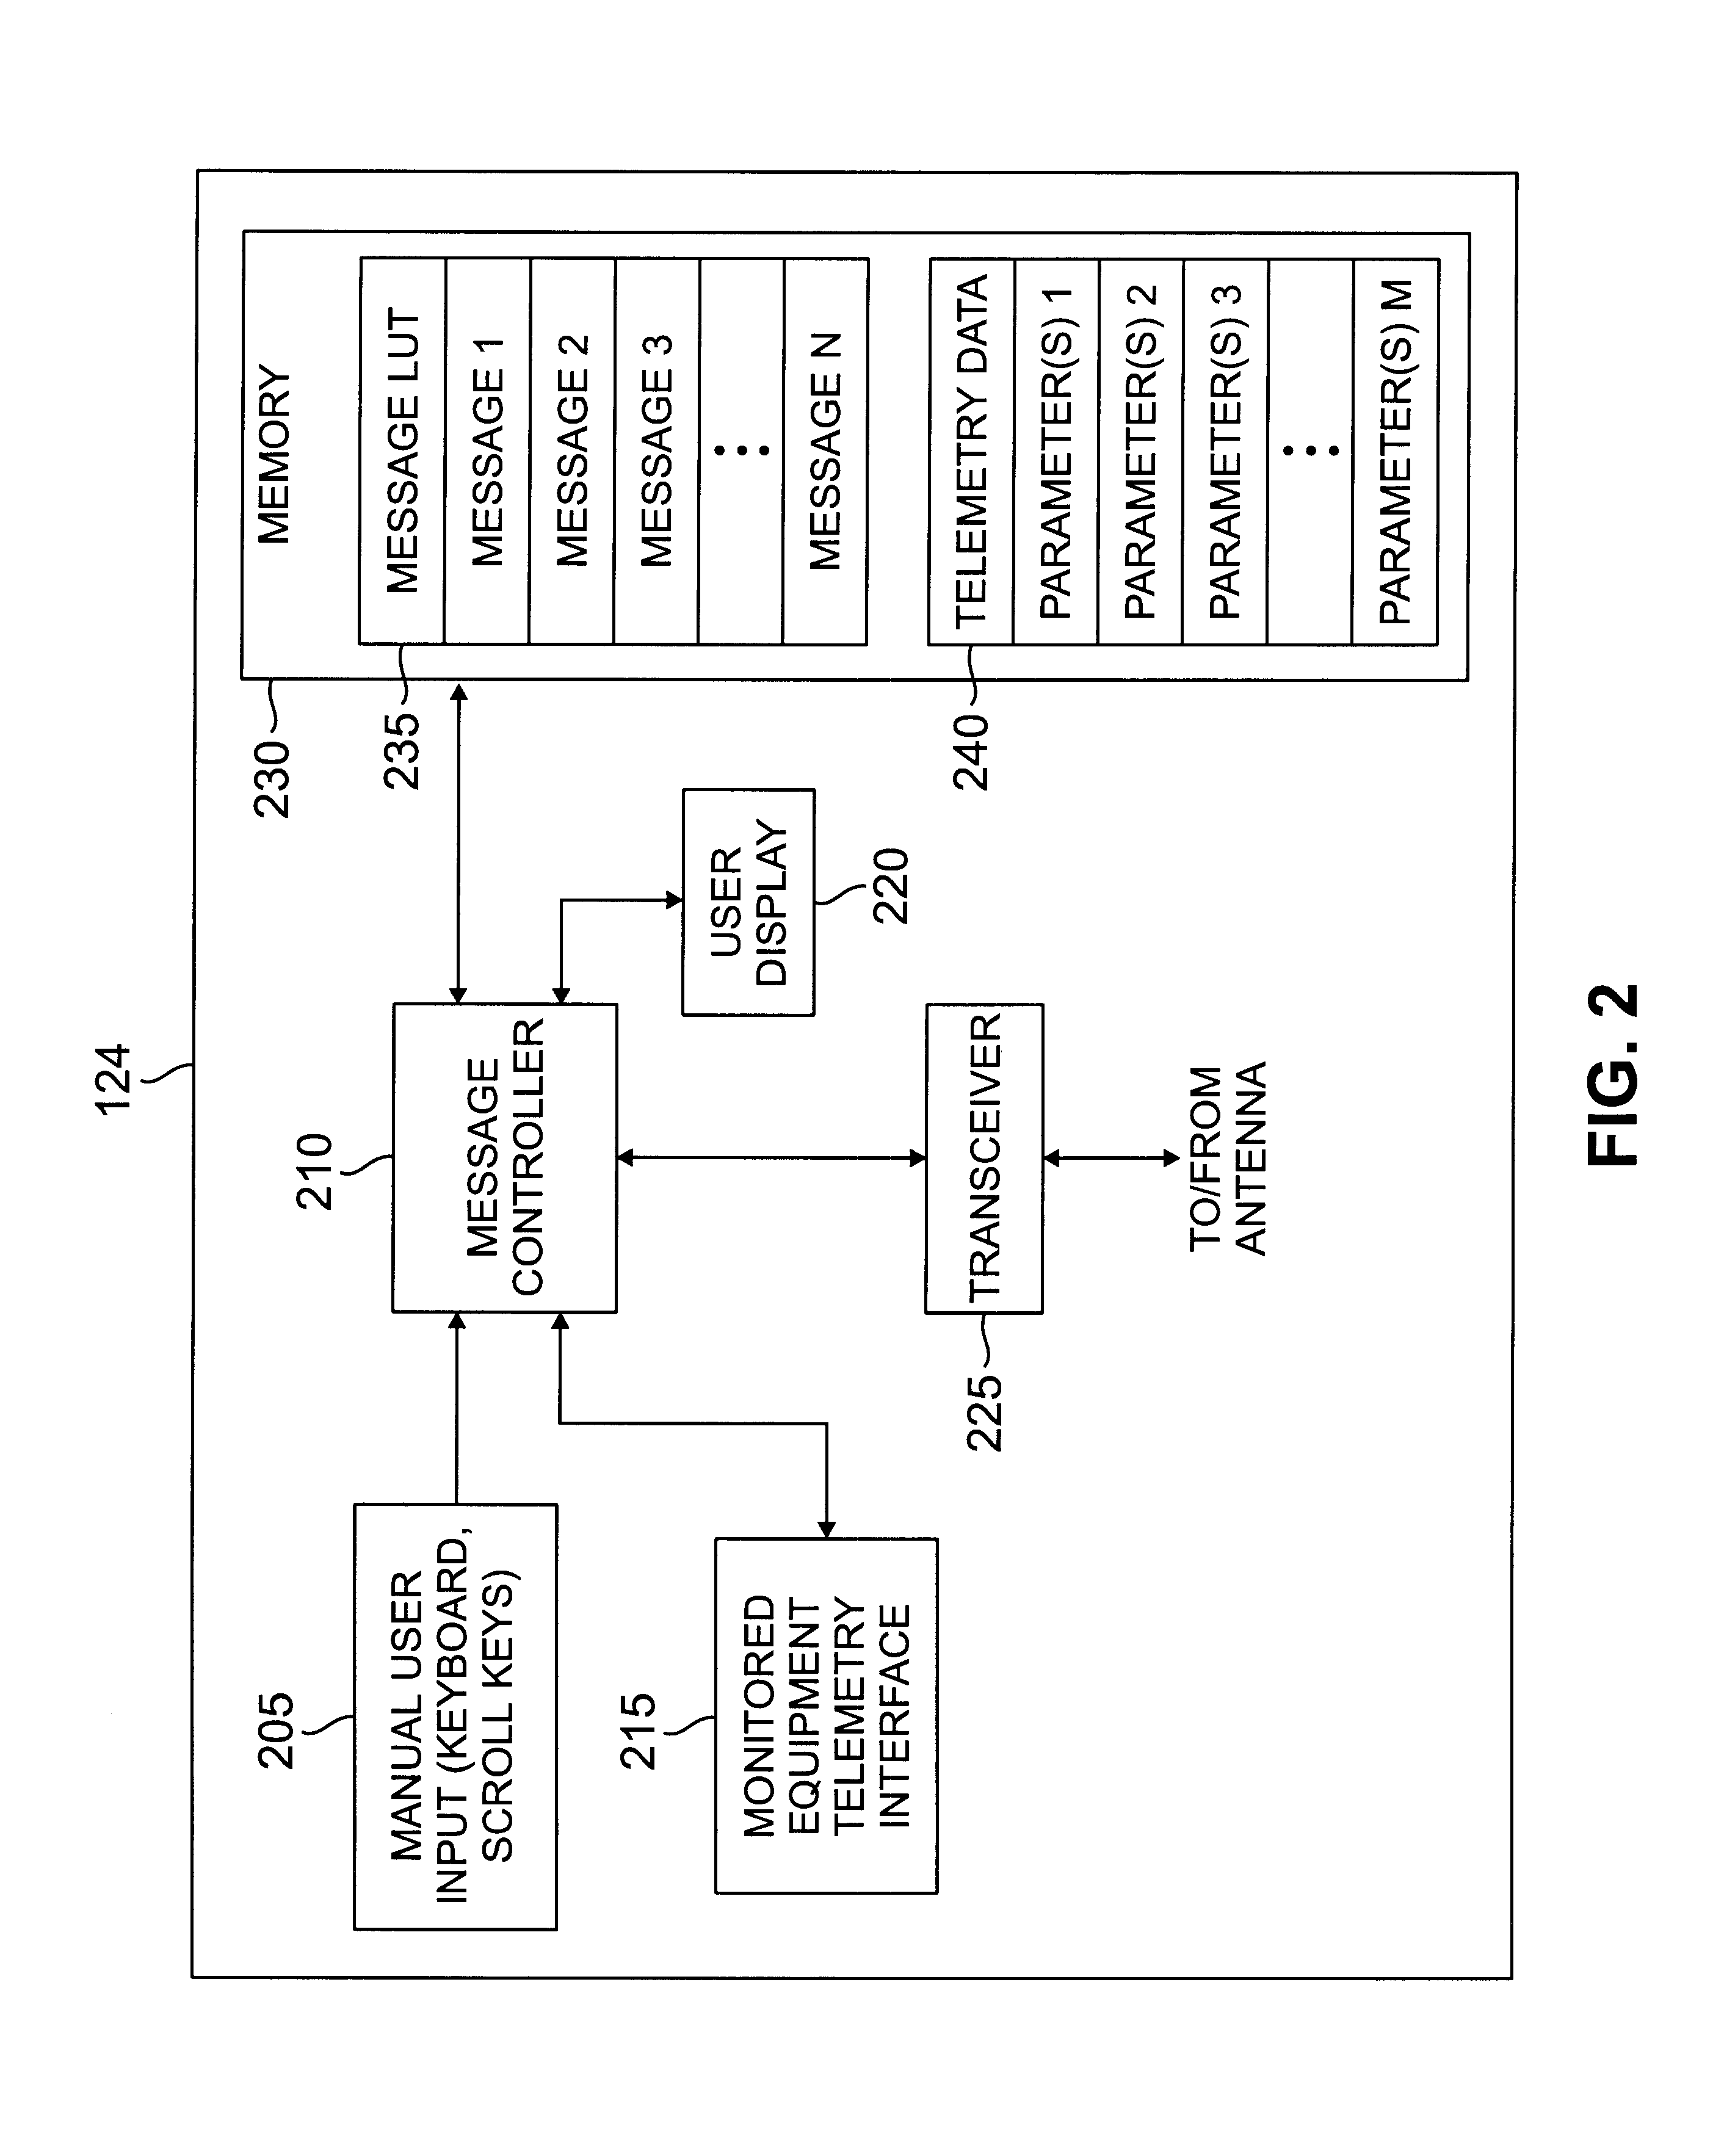 System and method for transmitting subscriber data in a narrowband advanced messaging system using unscheduled message time slots